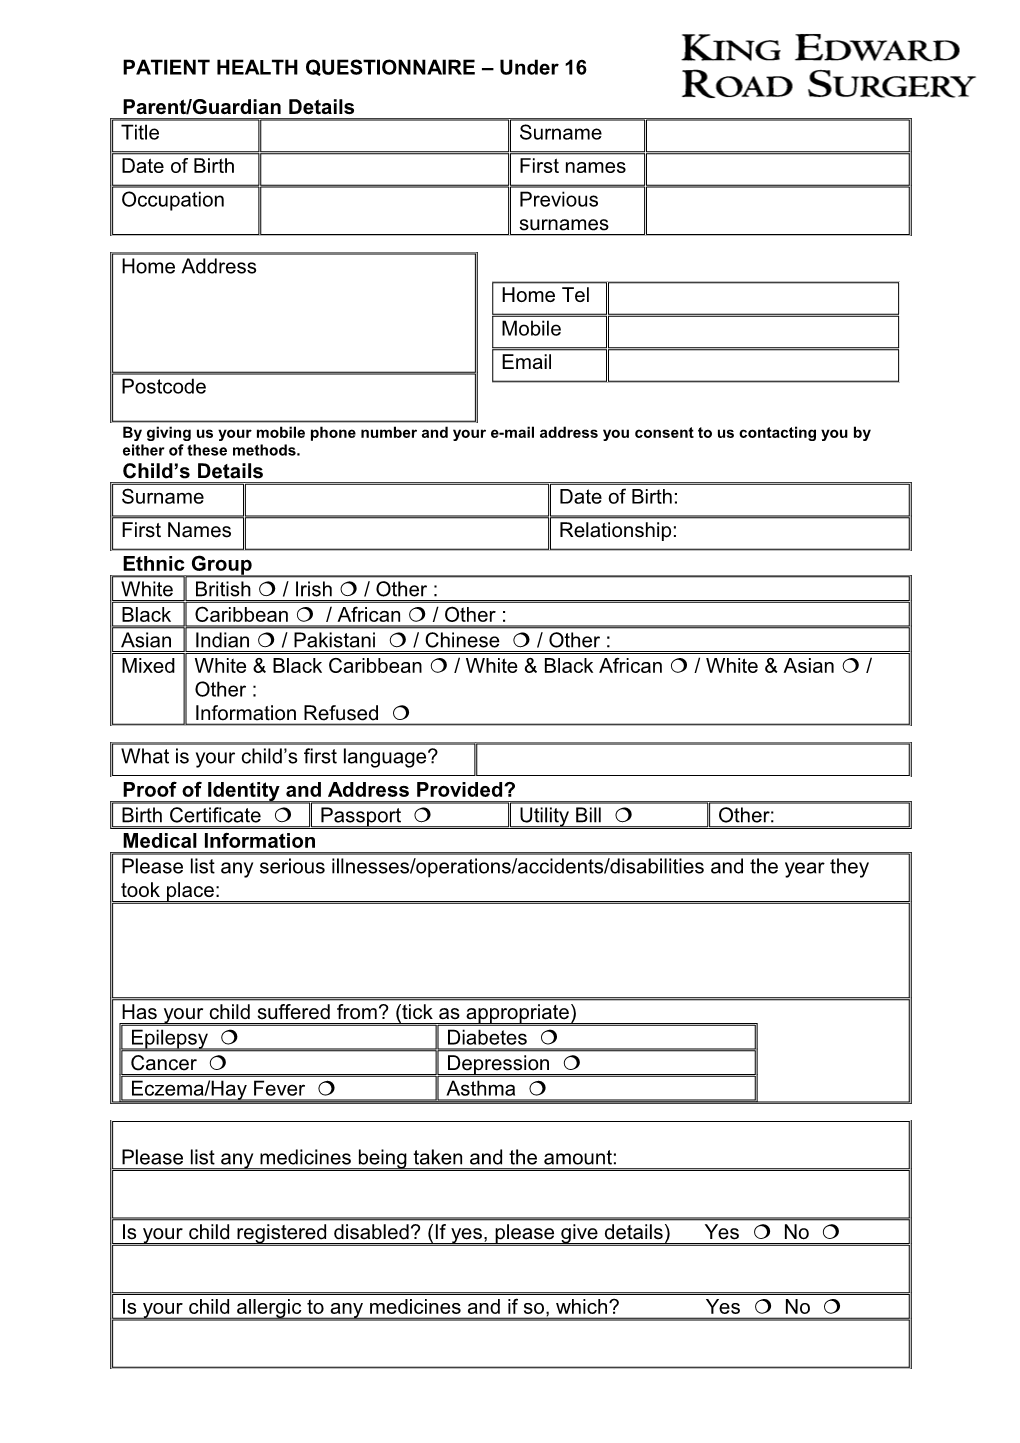 New Patient Health Questionnaire for Adults